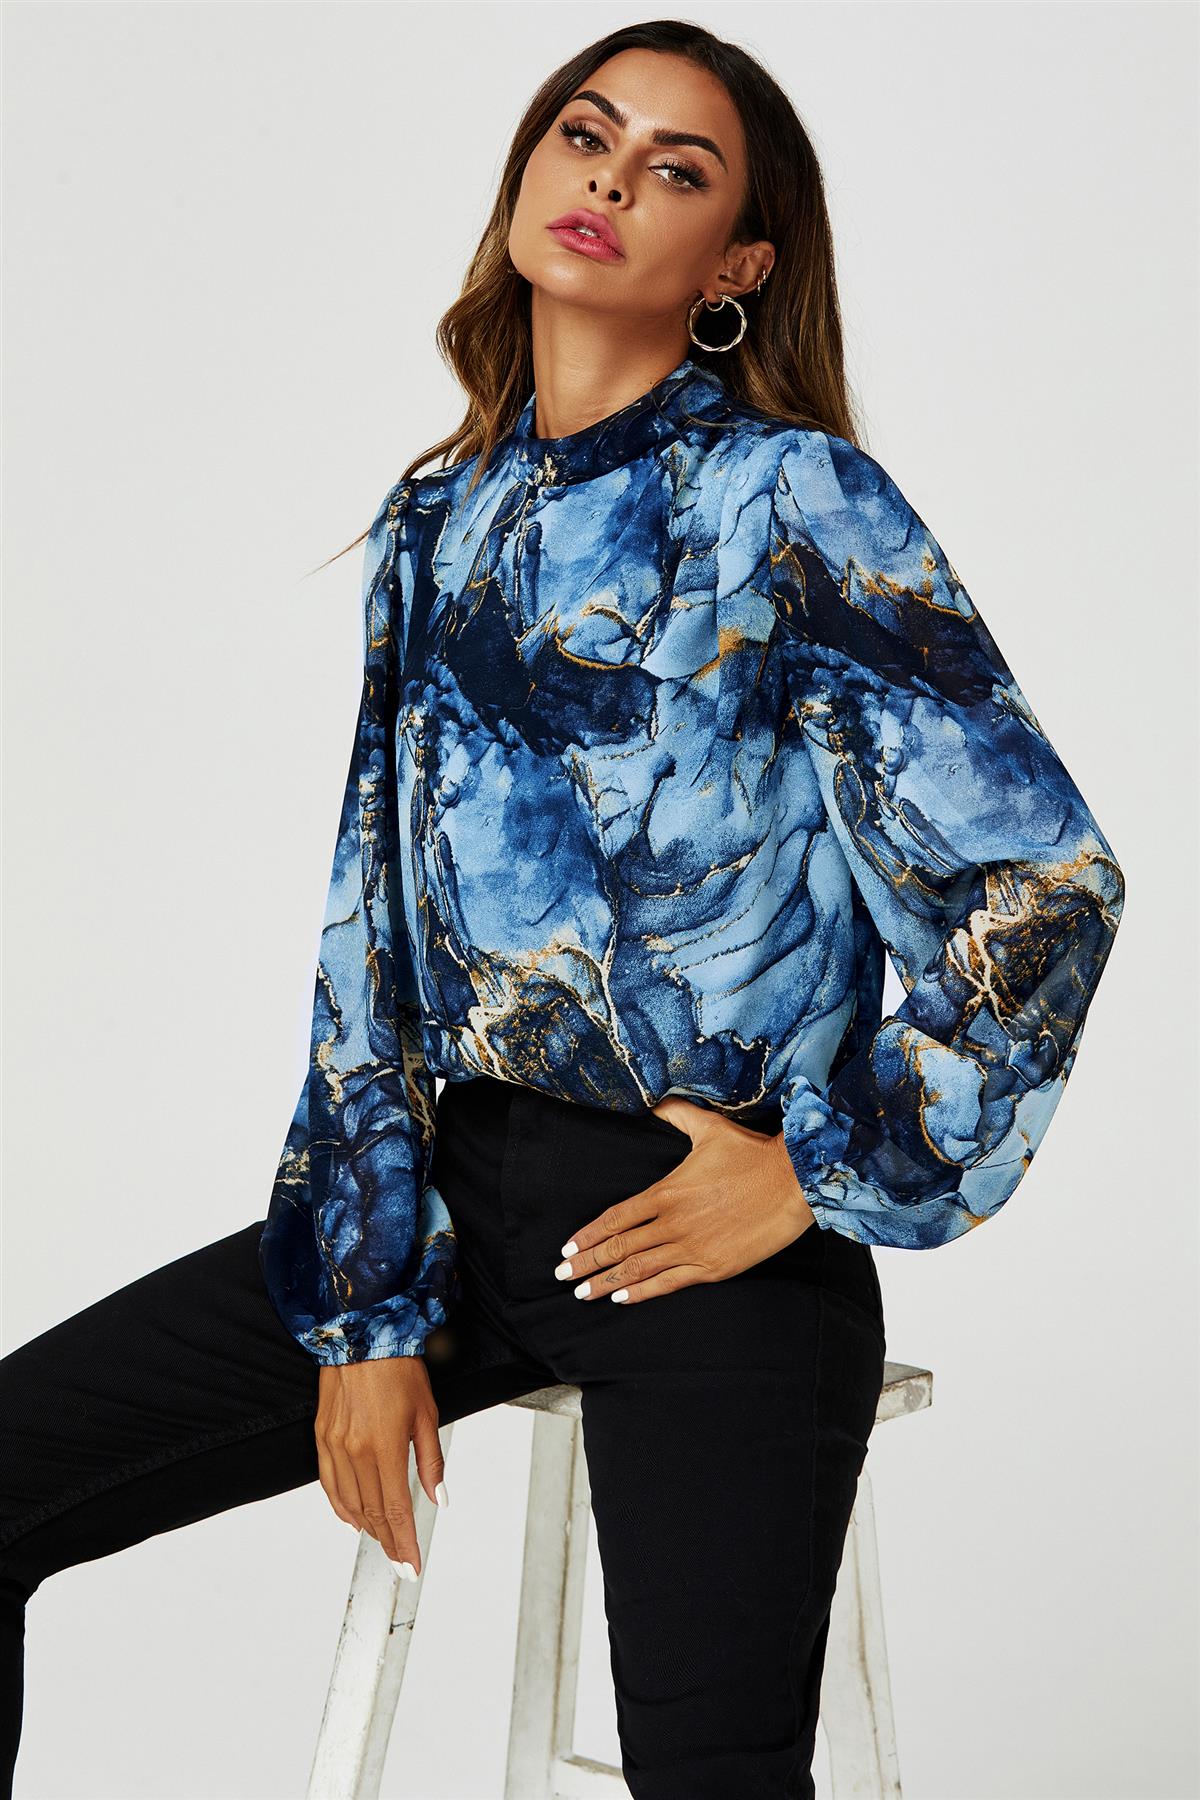 Marble Print Long Sleeve High Neck Top In Navy FS628